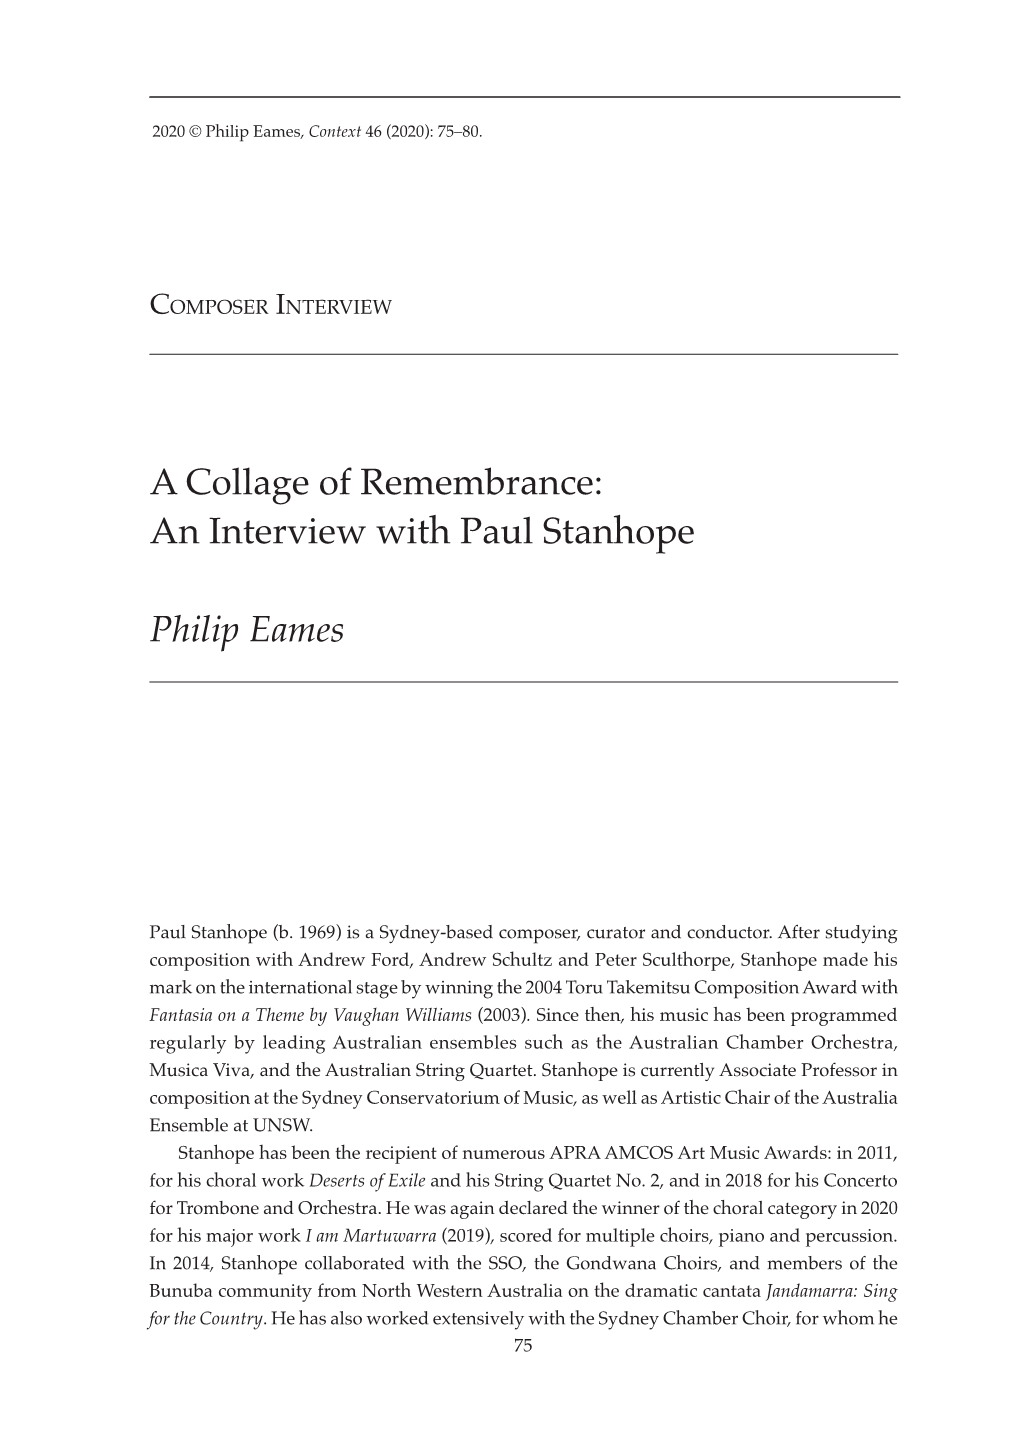 An Interview with Paul Stanhope